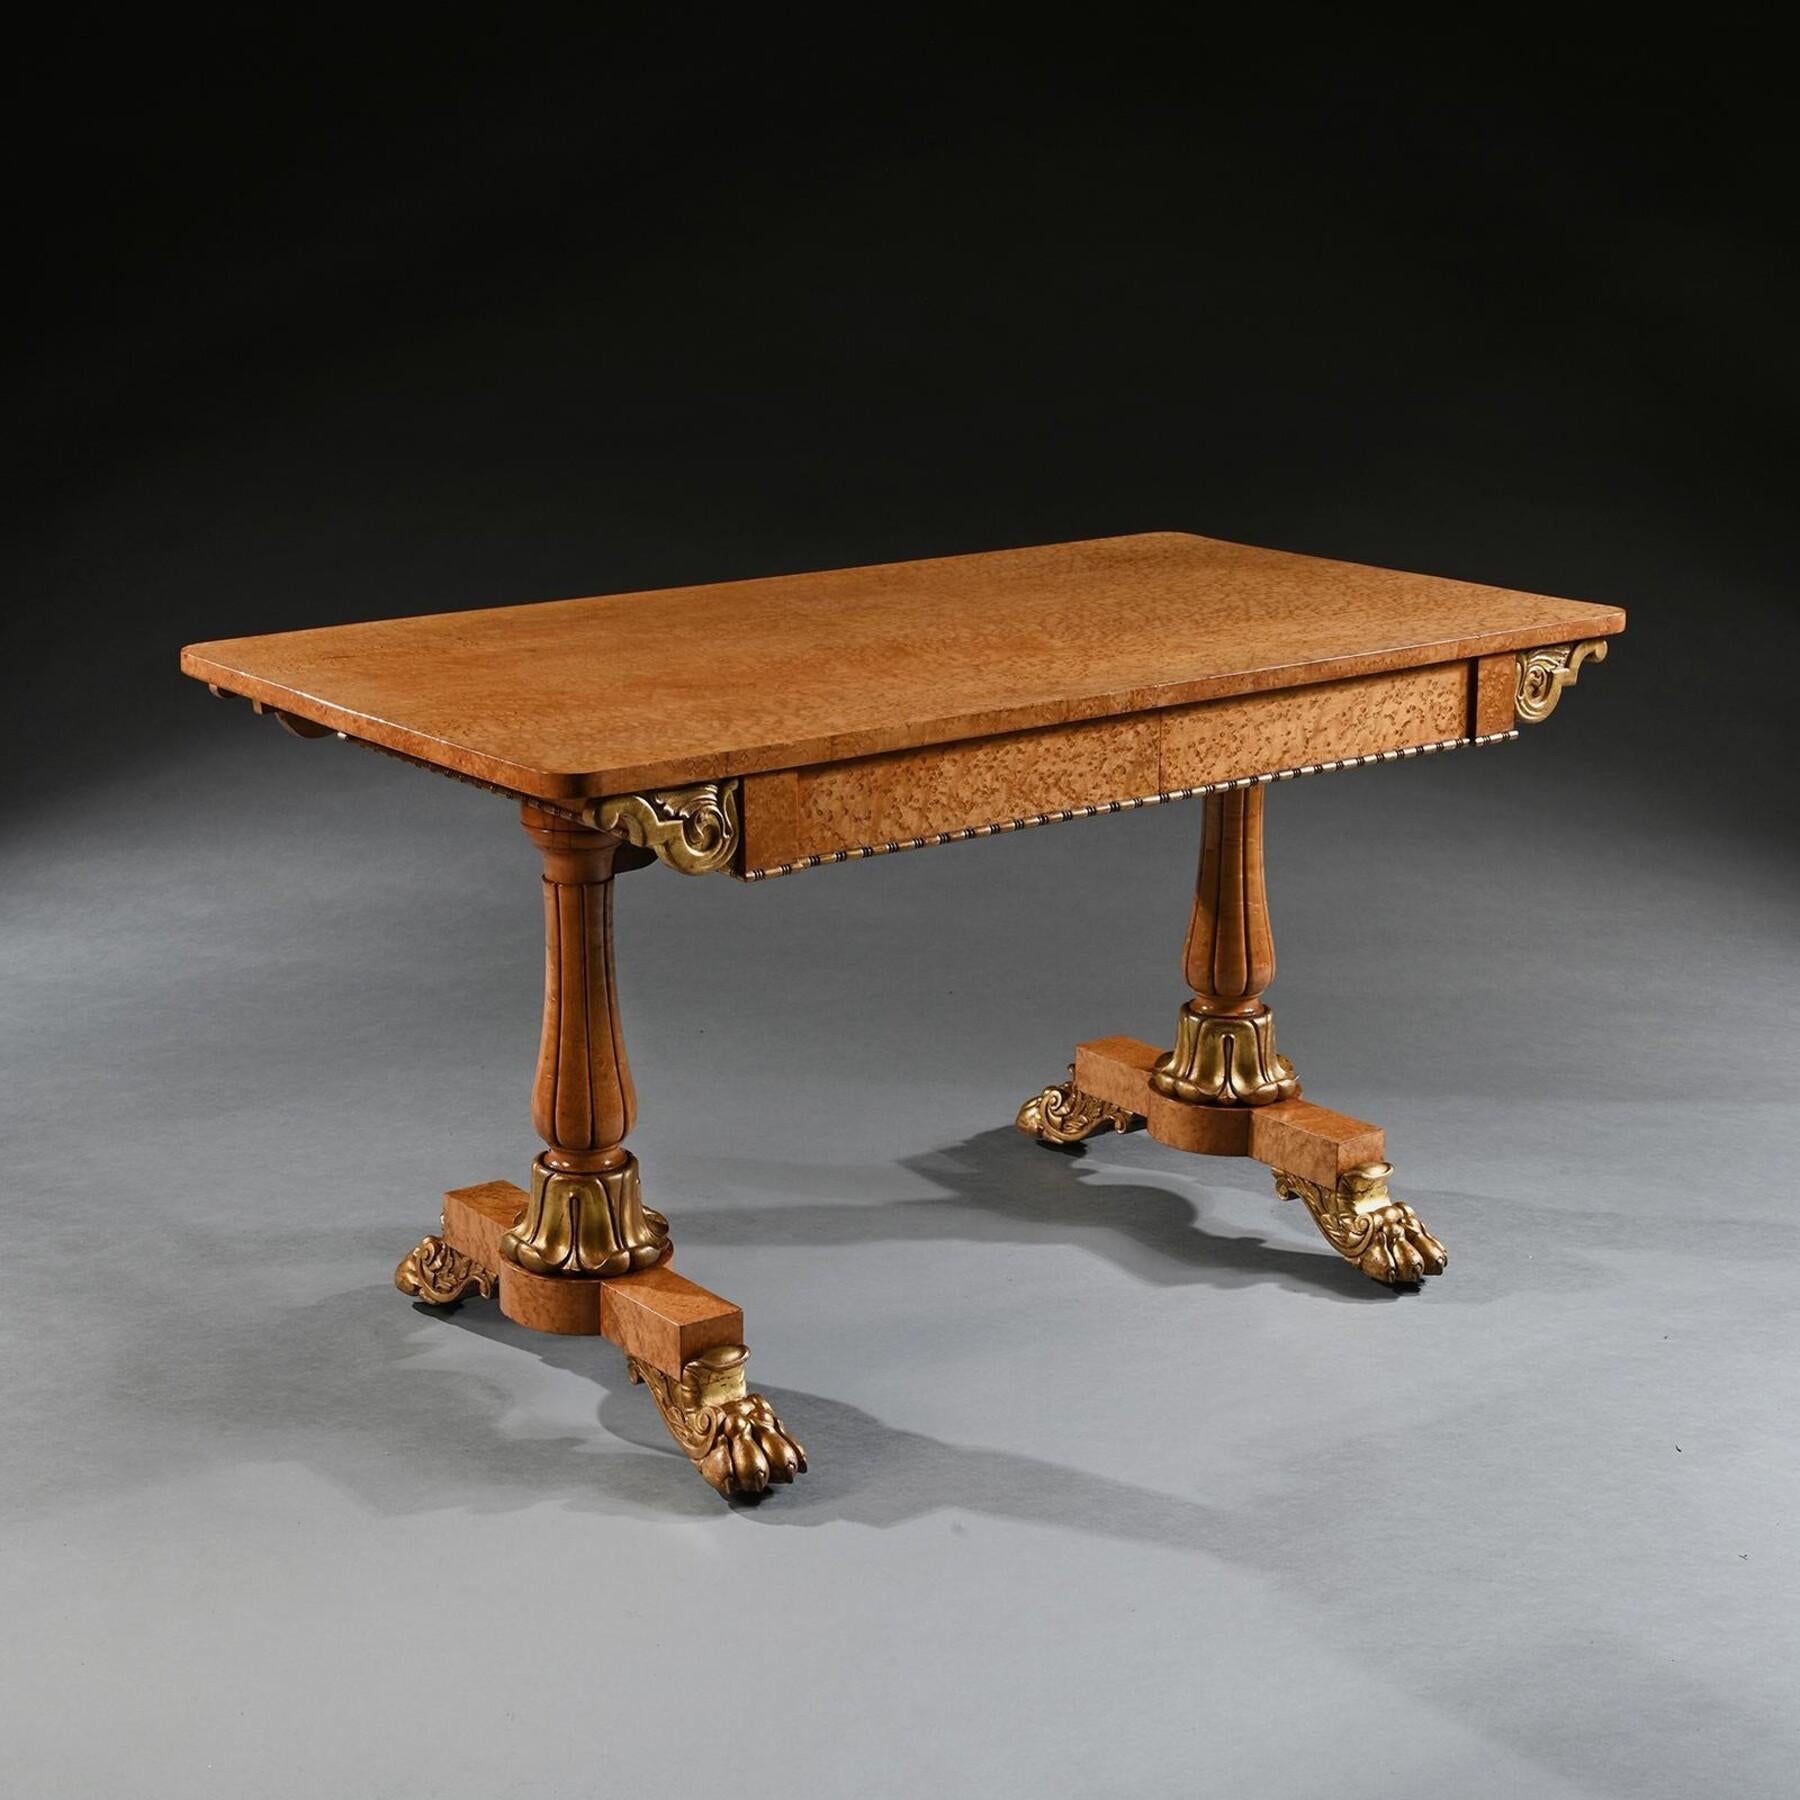 An Elegant William IV Birdseye Maple and Carver Giltwood Library / Centre or Sofa Table  

English Circa 1830

This distinctive library or centre table of birdseye maple and carved giltwood portrays an impressive appearance. The superior